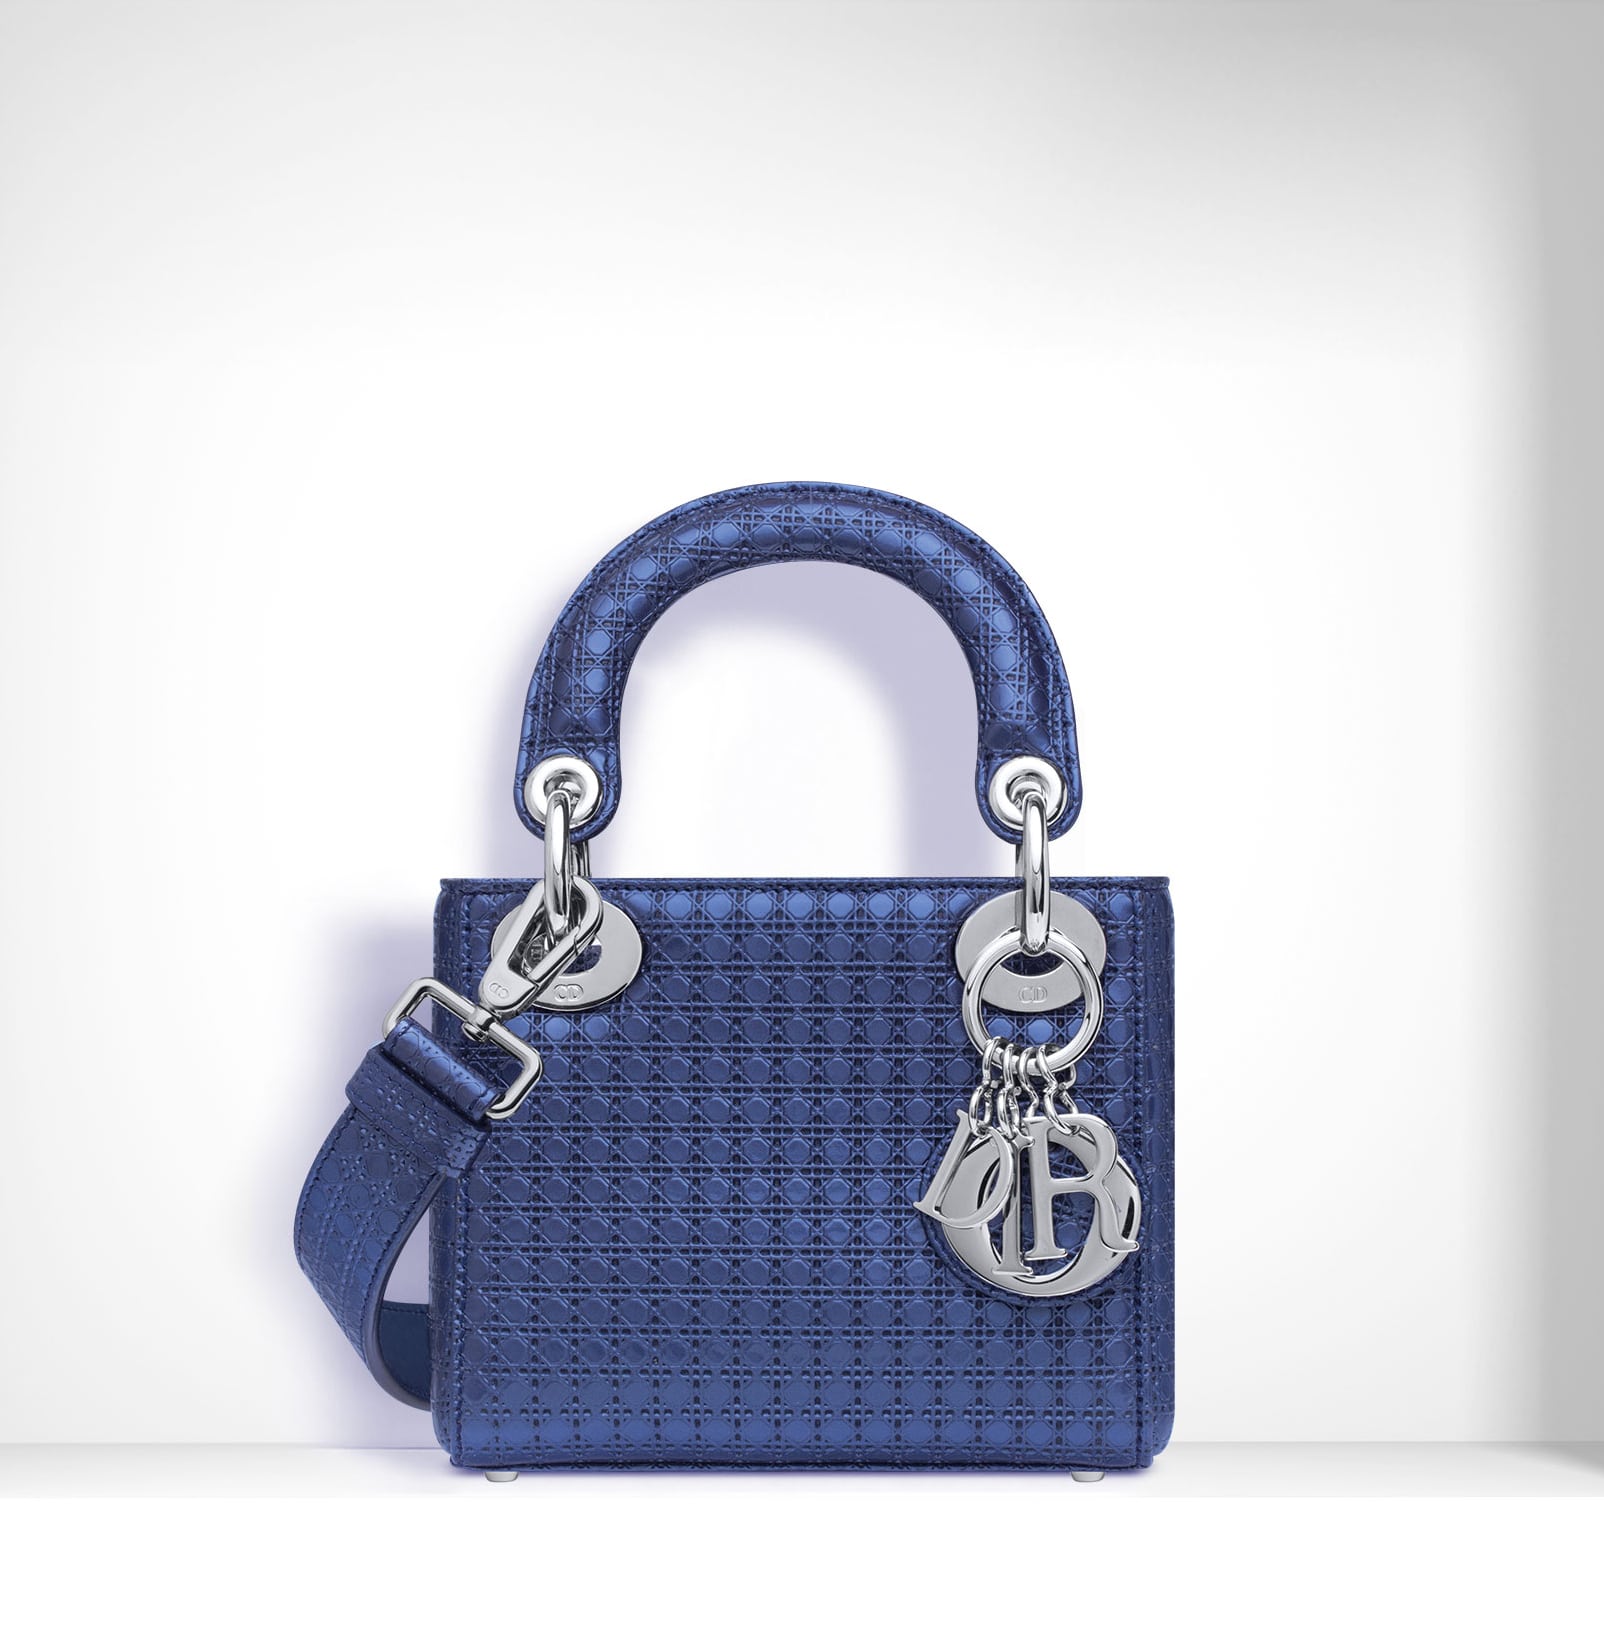 Comprehensive Guide for the Lady Dior - 25 Years and Counting - PurseBop